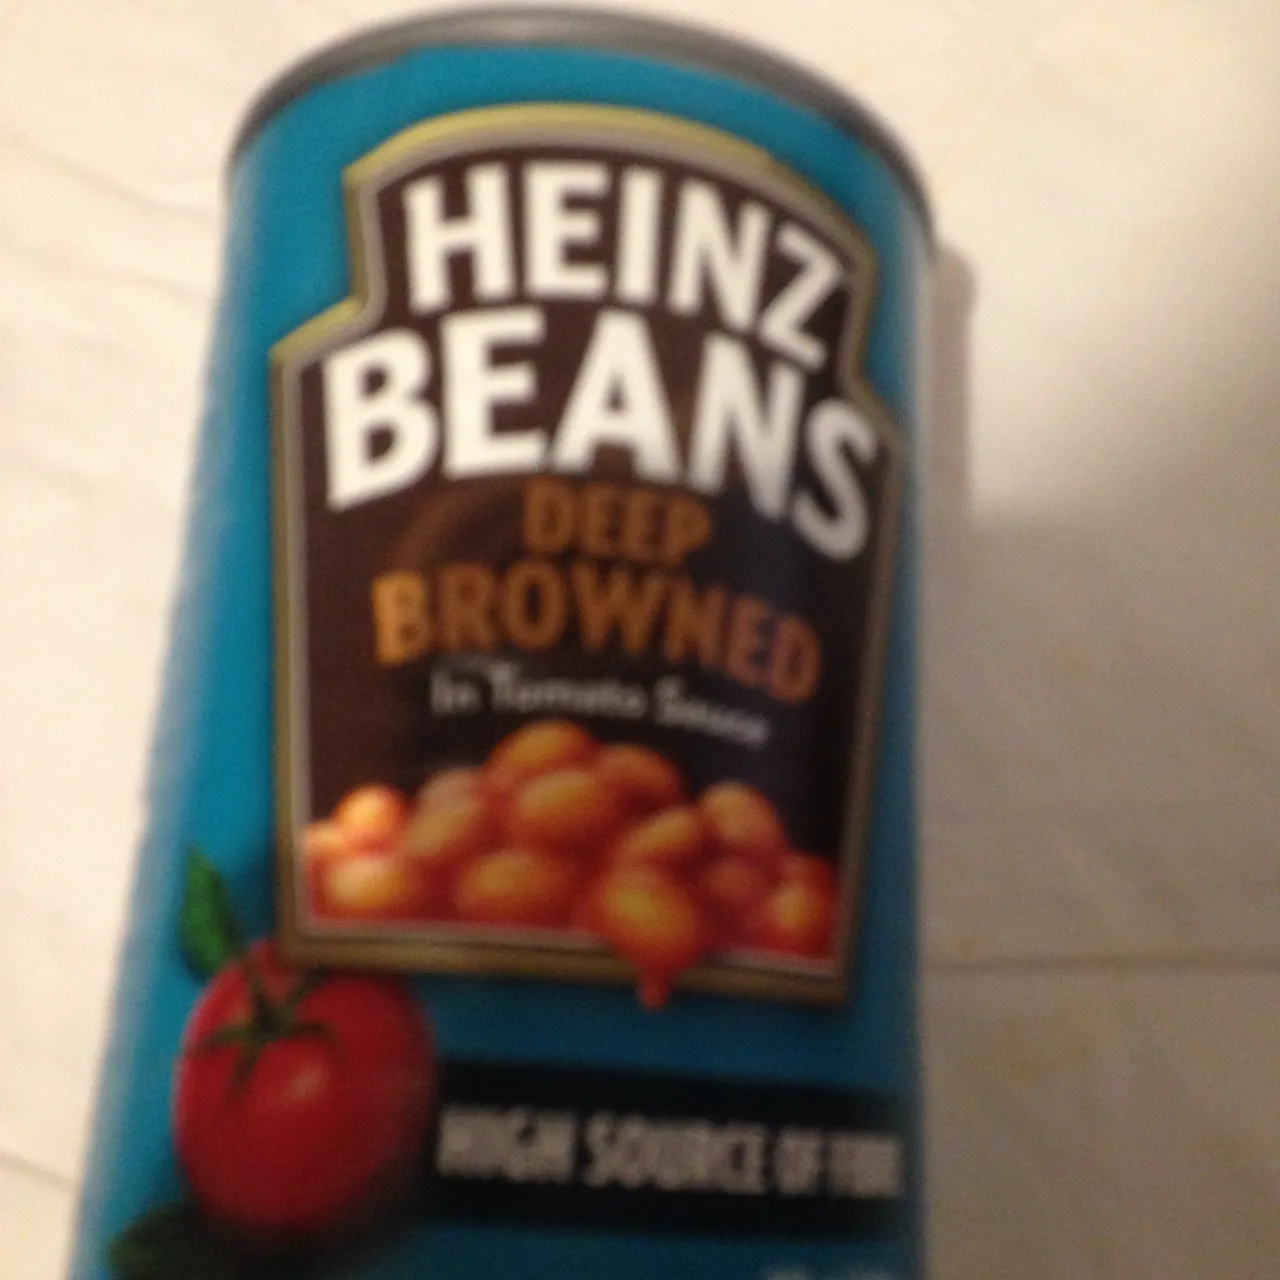 Heinz Beans Deep Browned 2 cans photo 1